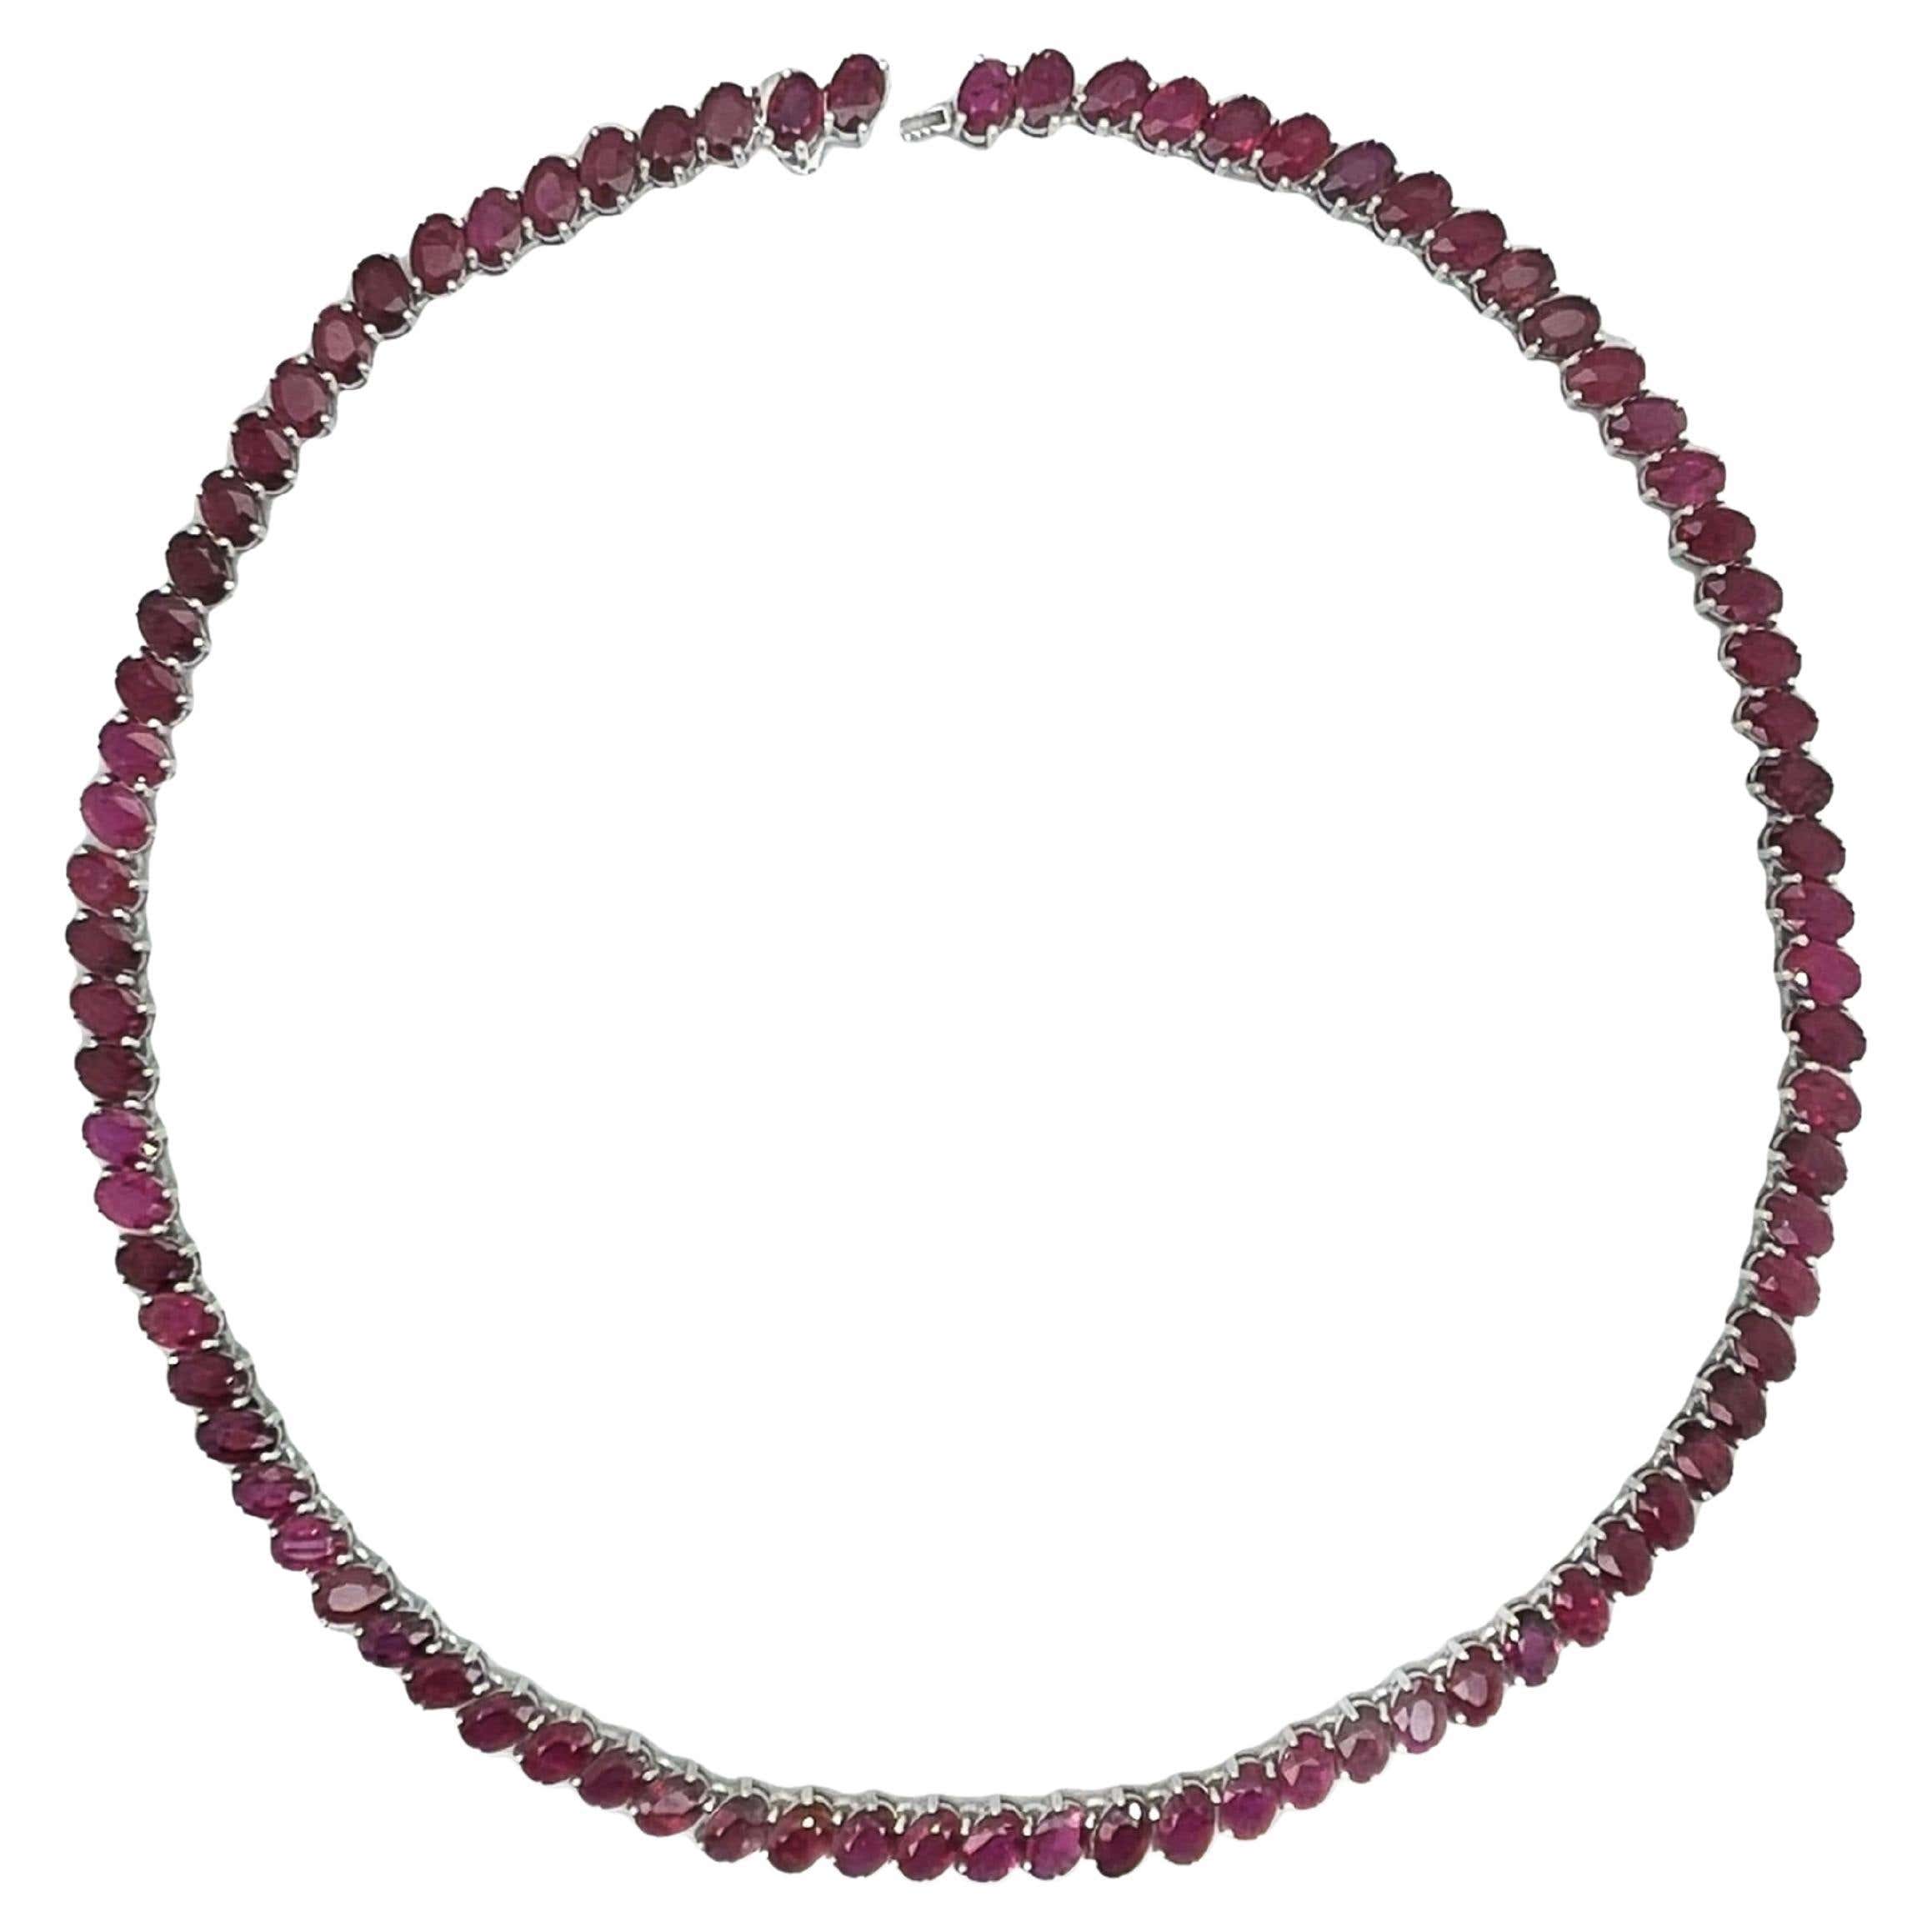 IGI Certified 41.71ct Natural Rubies 14K White Gold Necklace